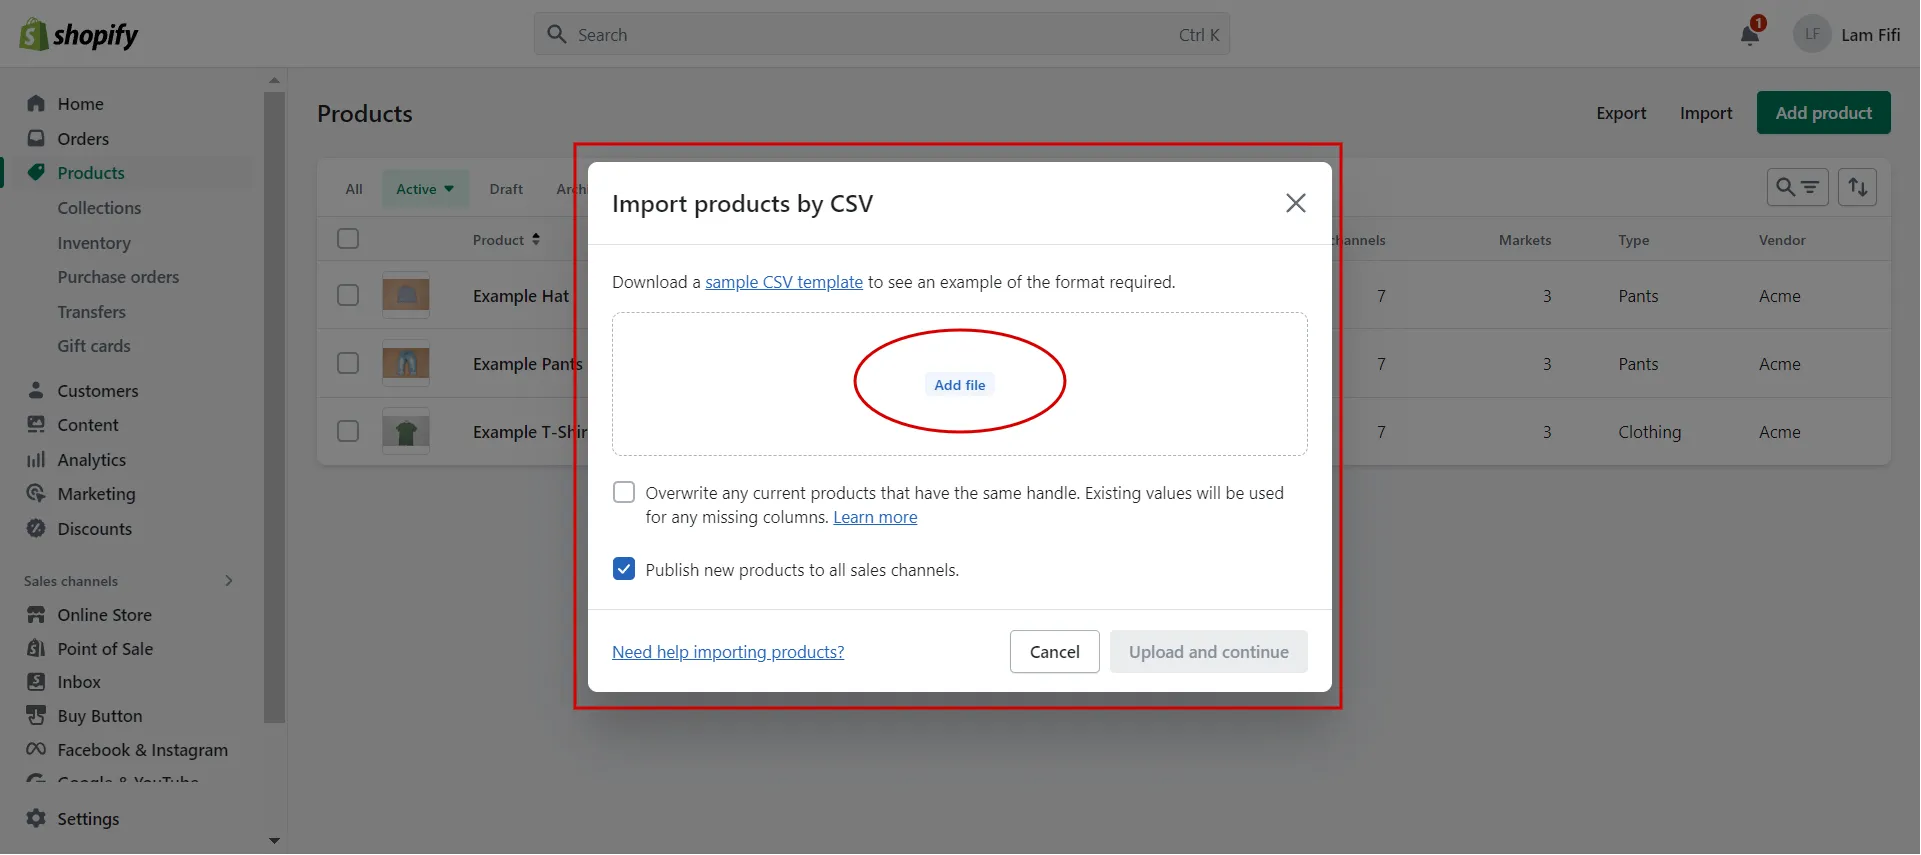 Add a CVS file to import products